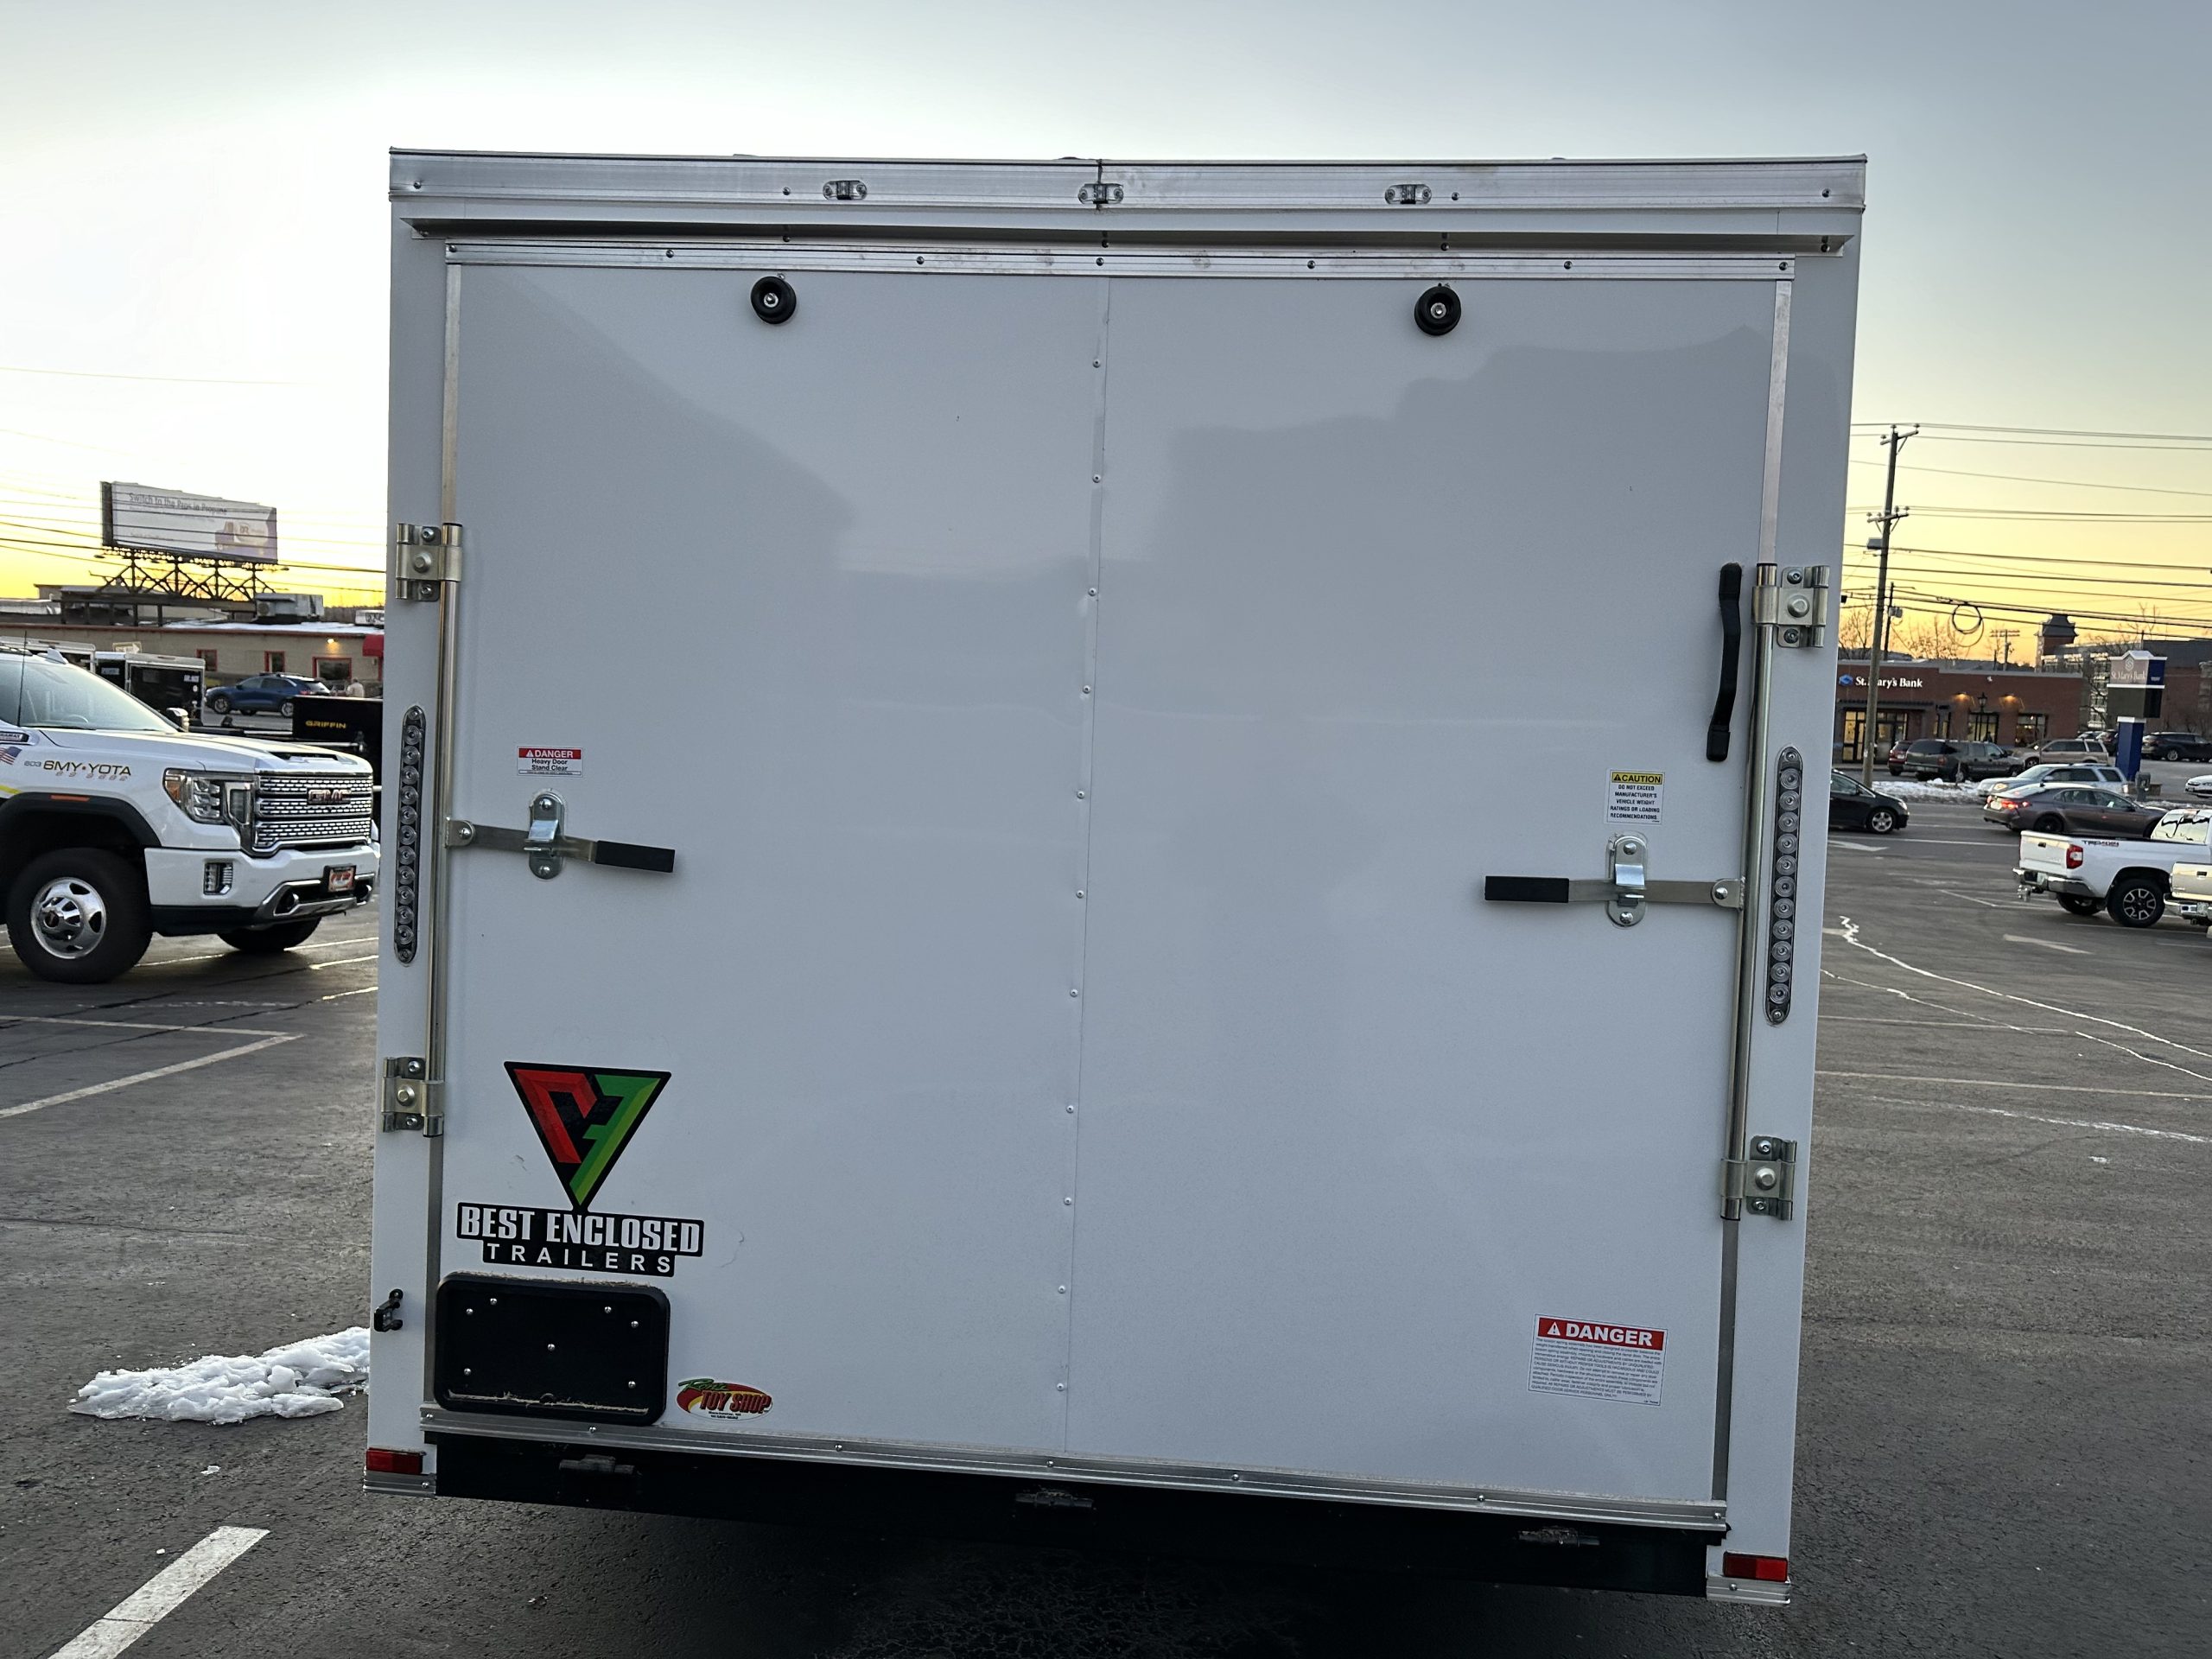 Best Enclosed Trailer 7'x16' White RAMP Dual Axle